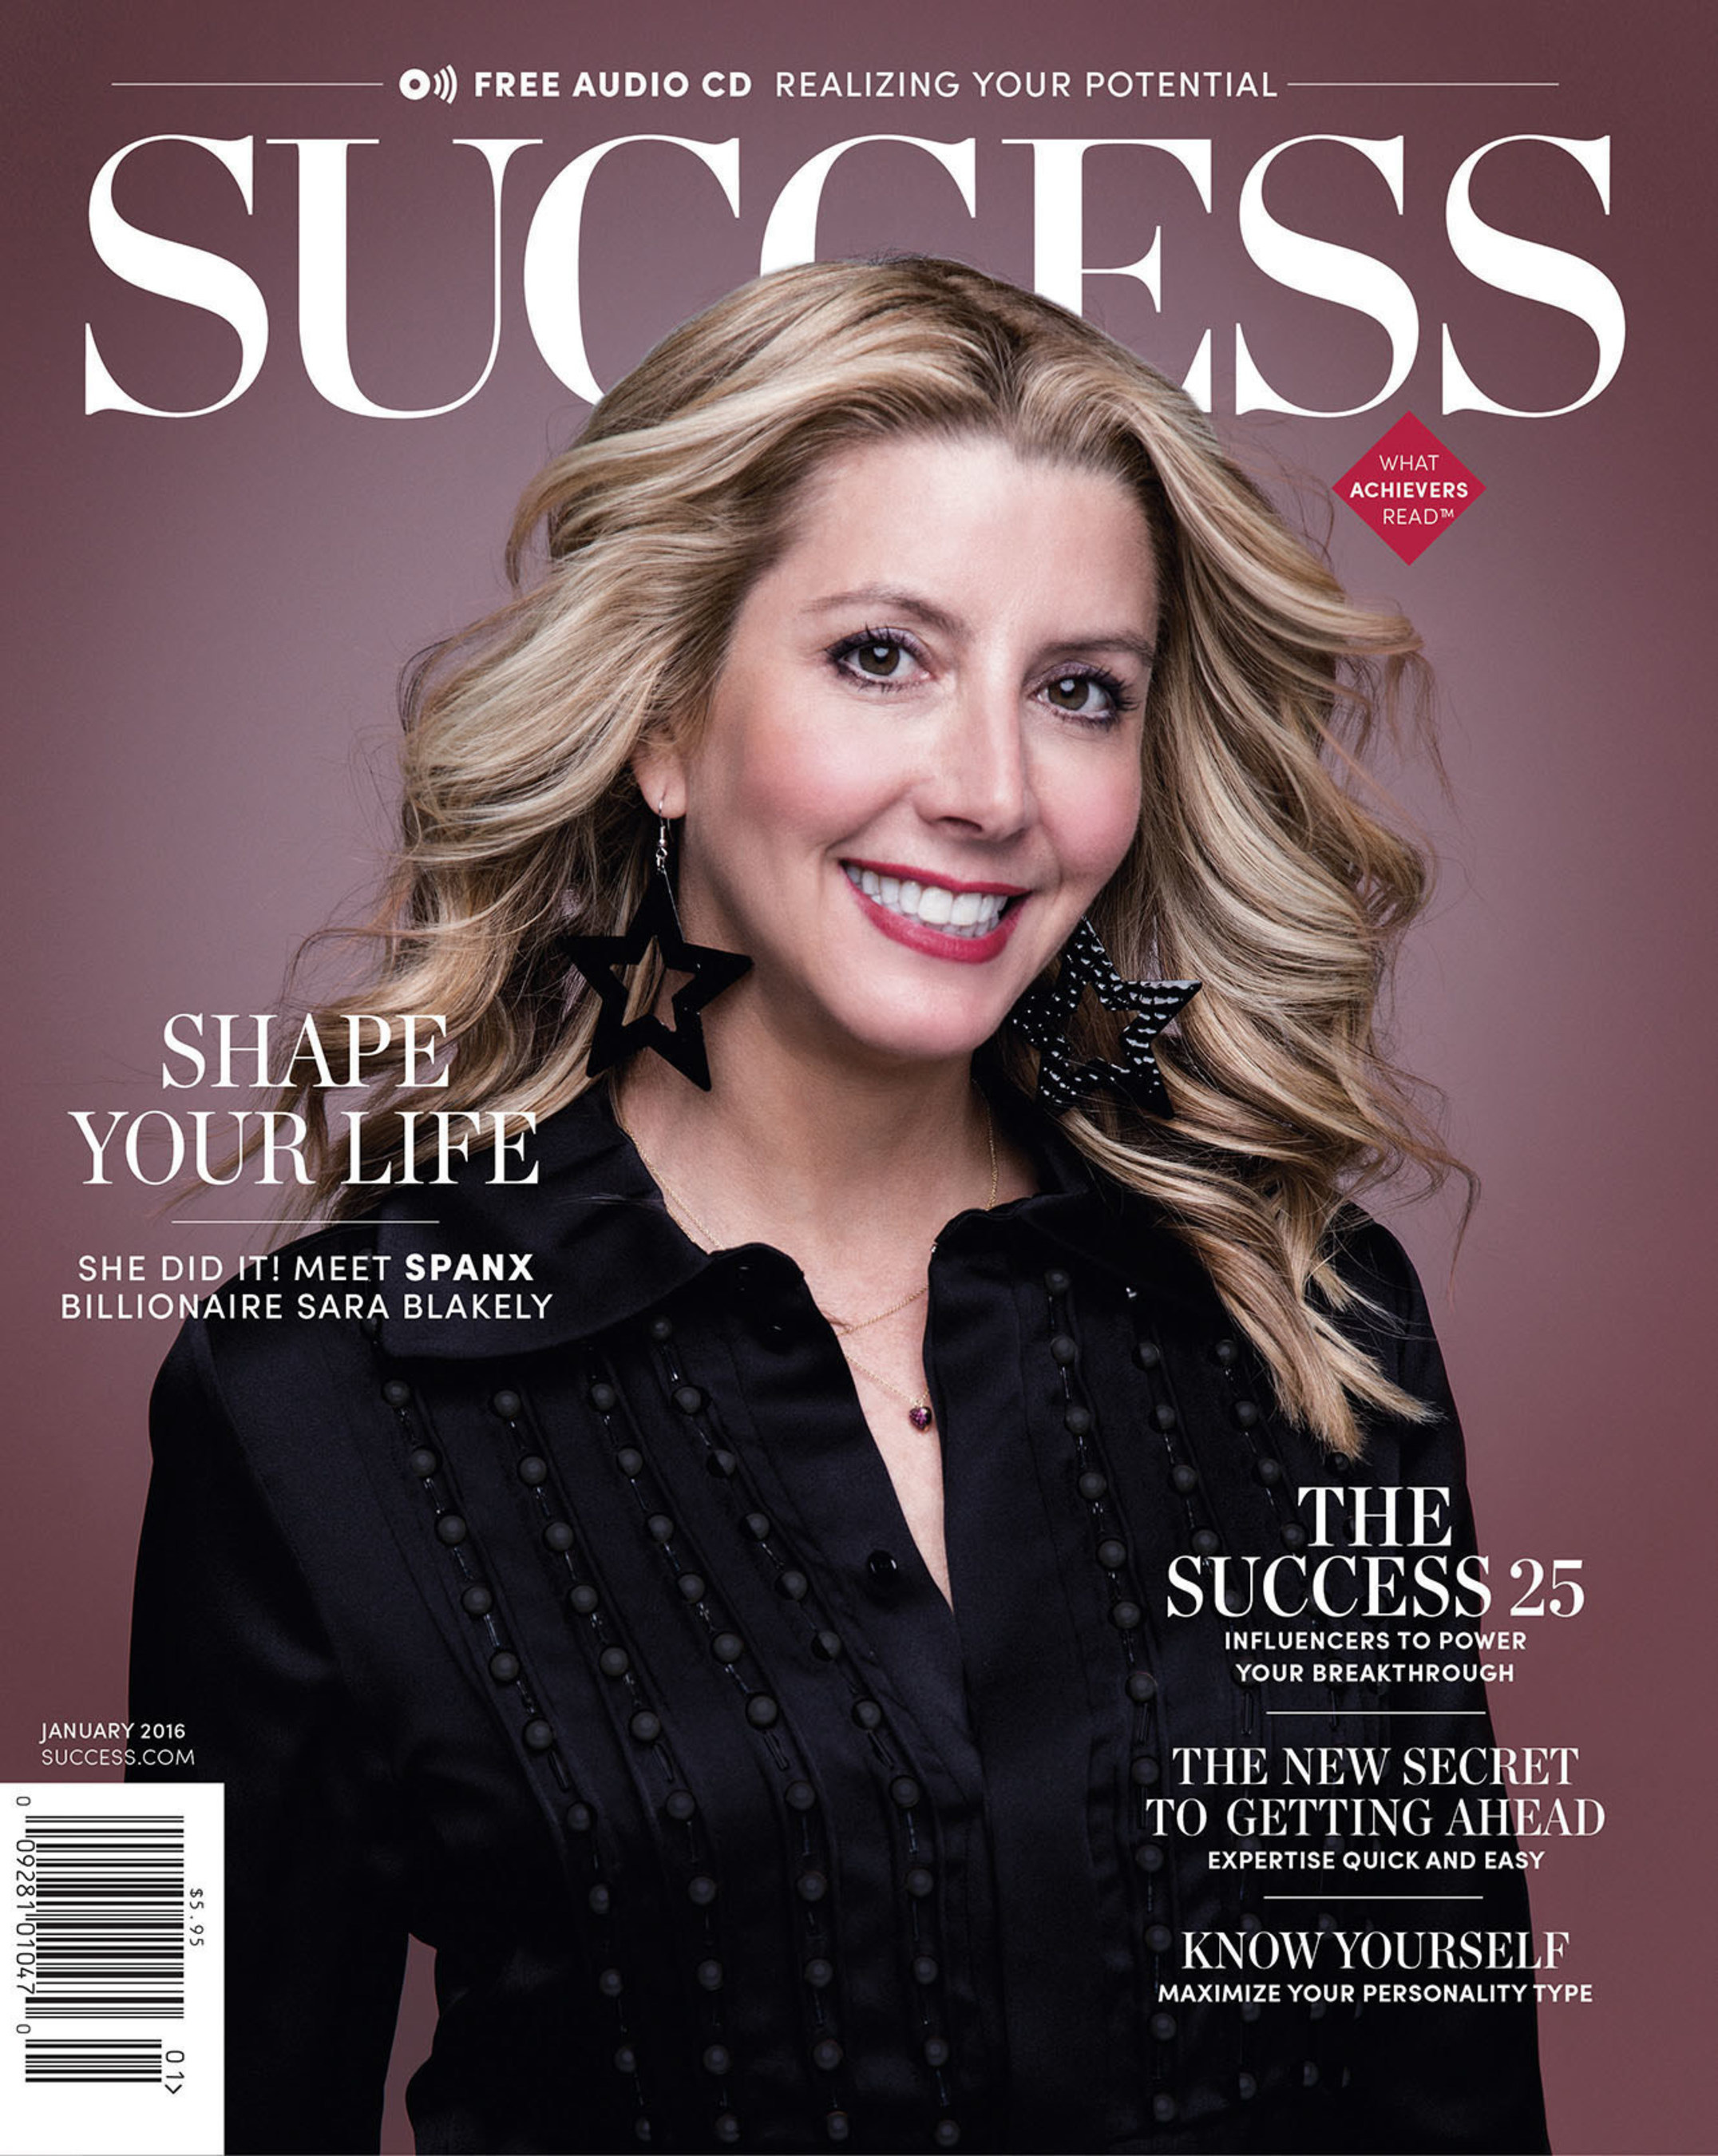 Spanx Founder Sara Blakely Shares the Secrets Behind Her Shapewear